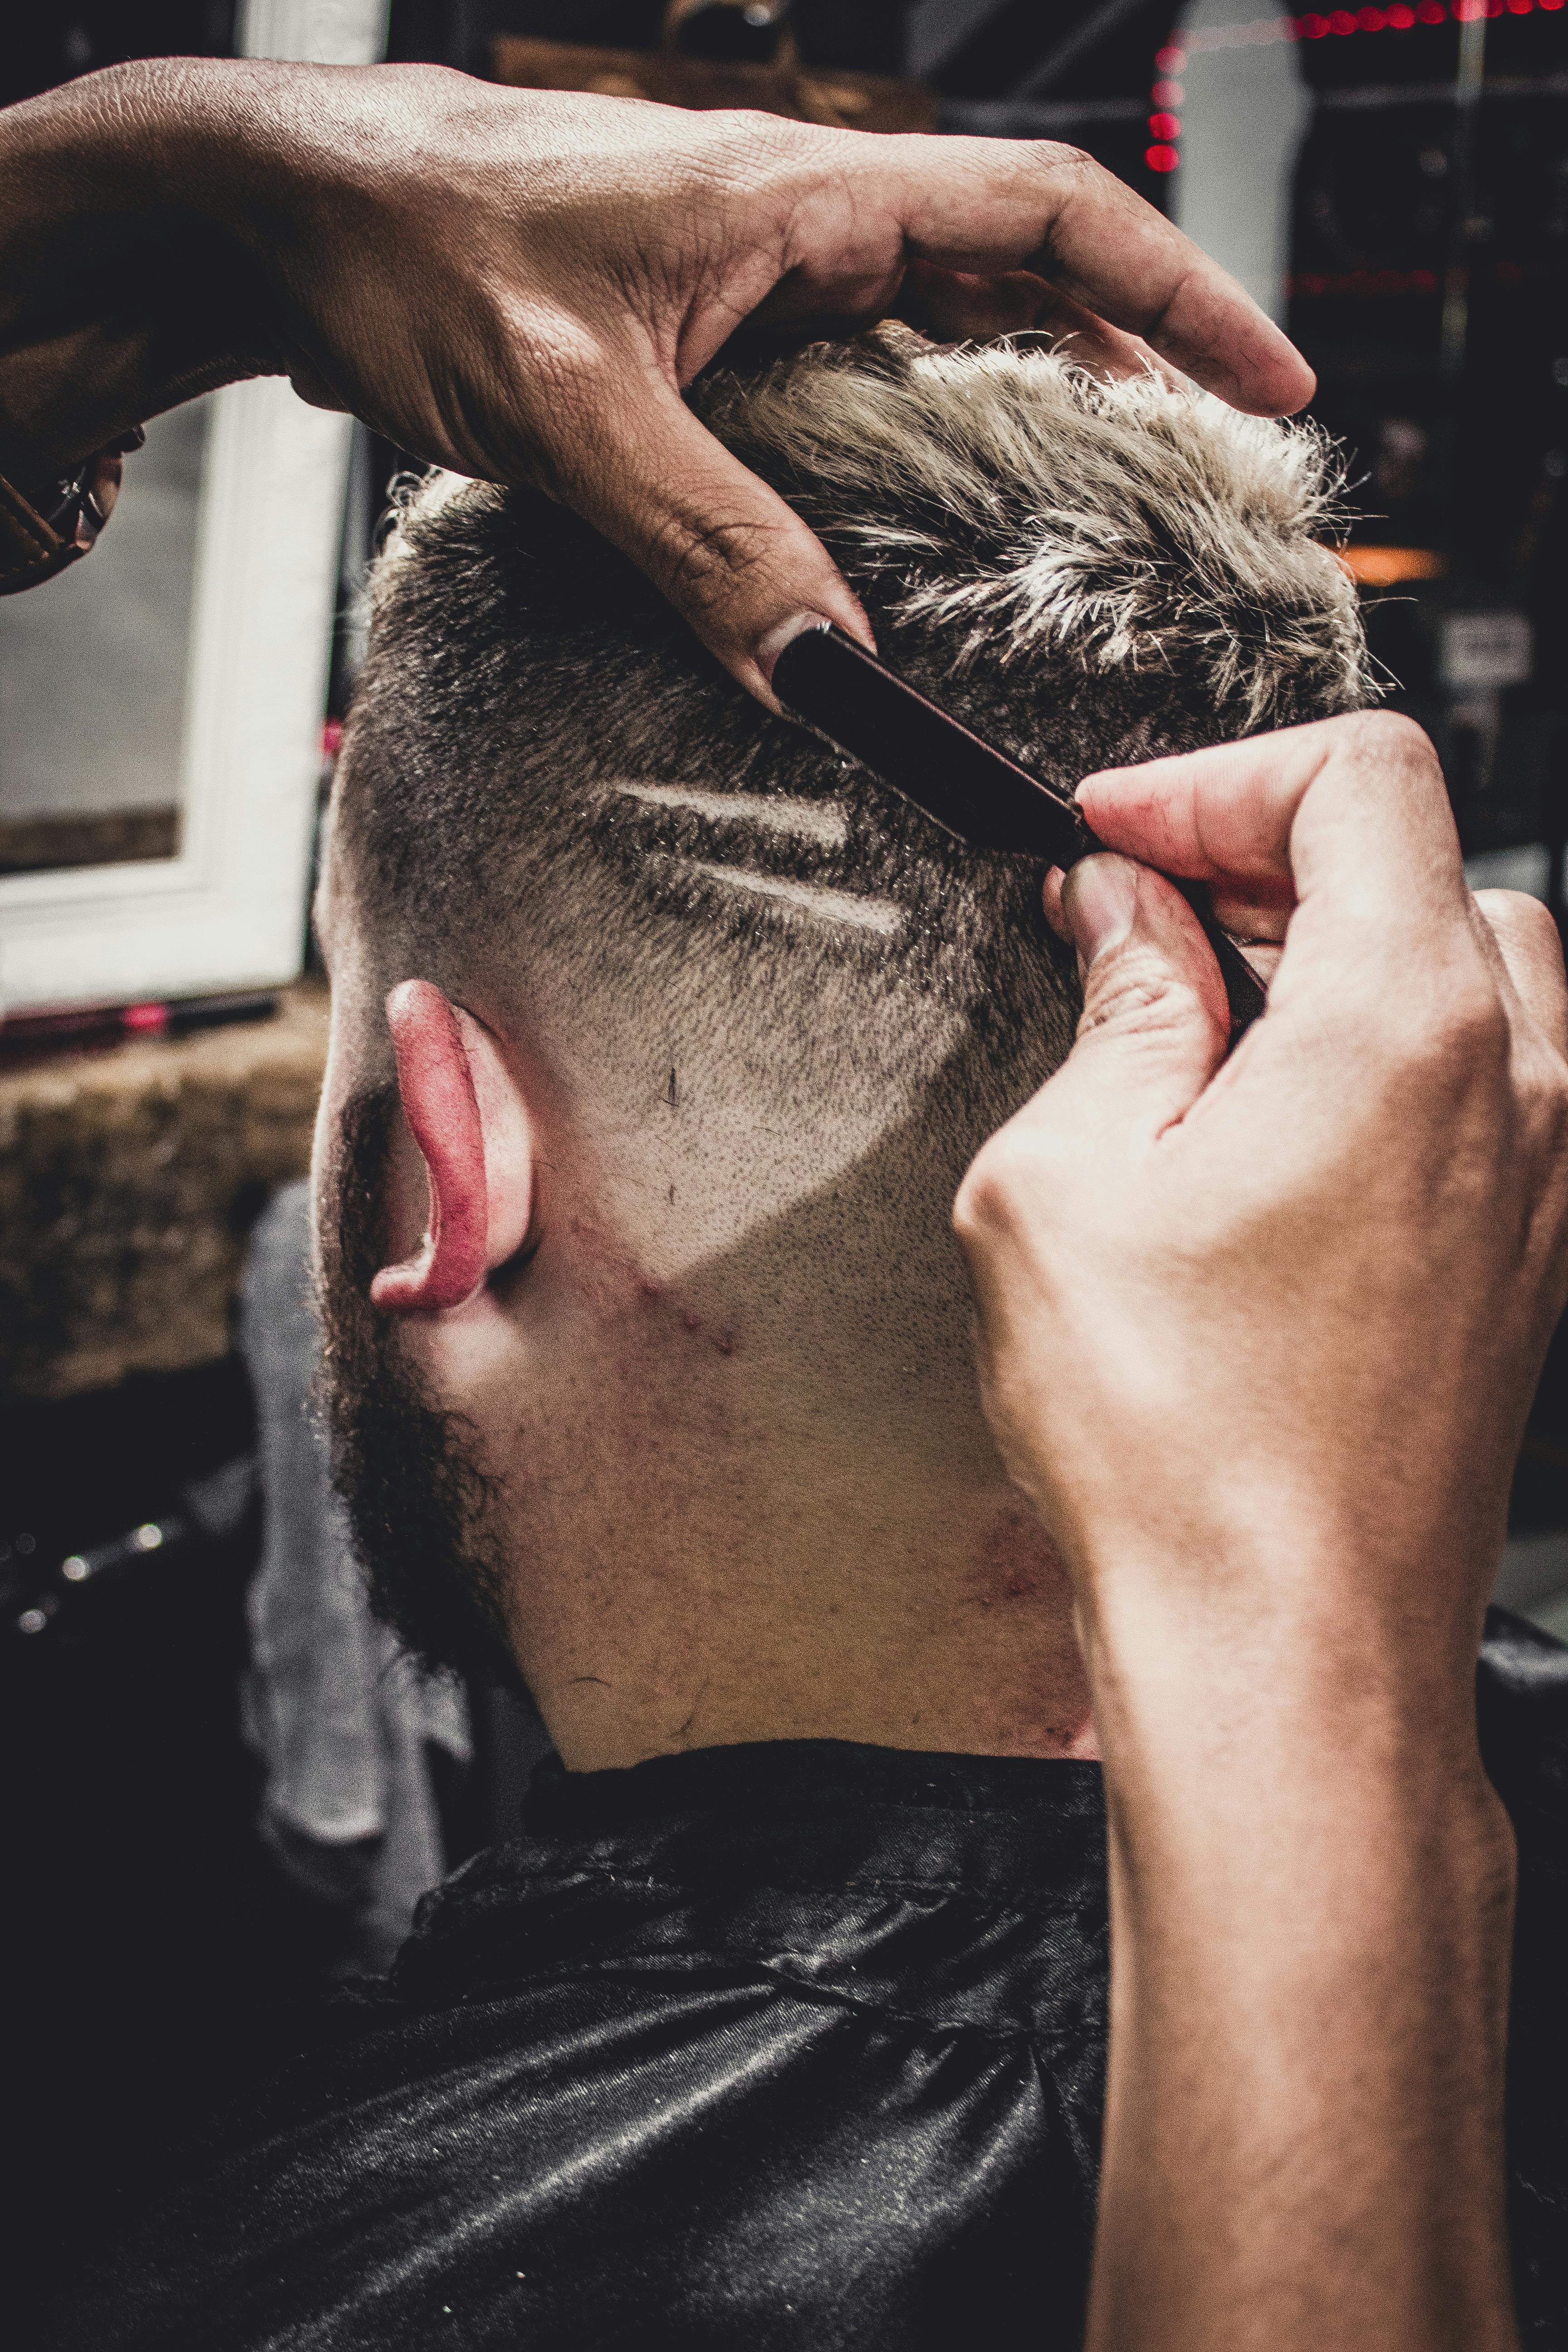 Haircut Photos, Download The BEST Free Haircut Stock Photos & HD Images